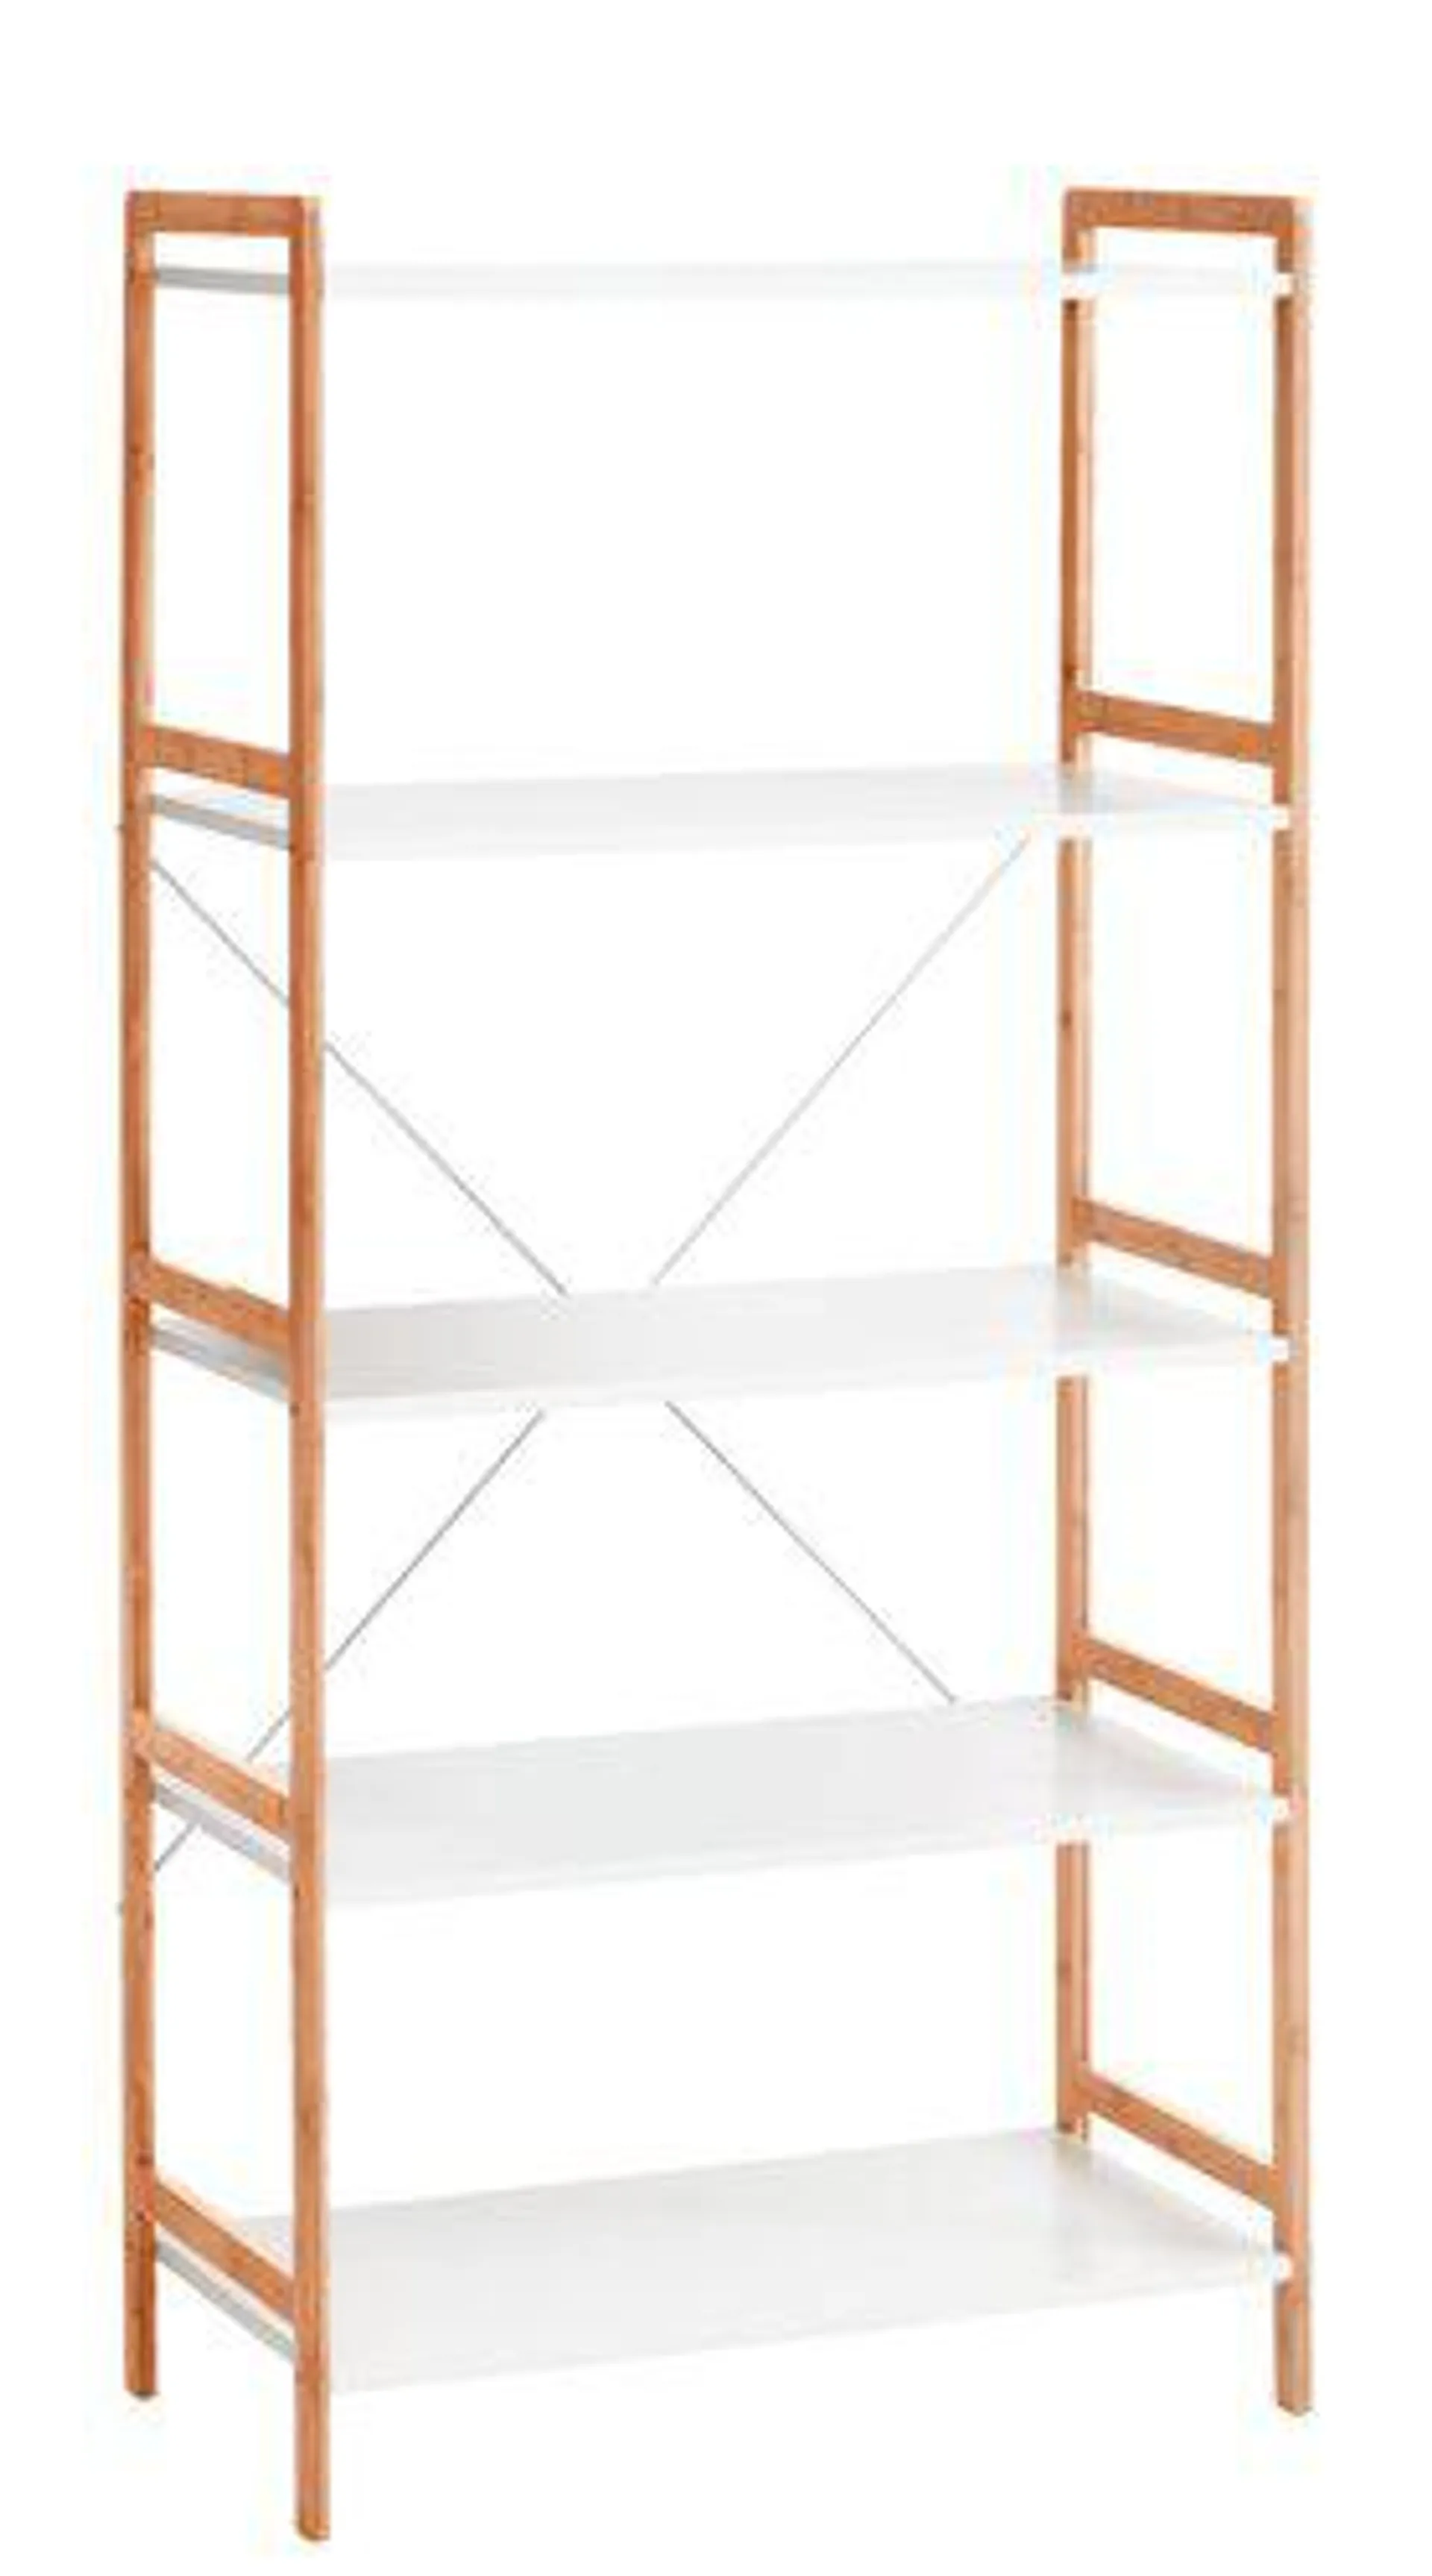 Shelving unit BROBY 5shlv wide bamboo/wh